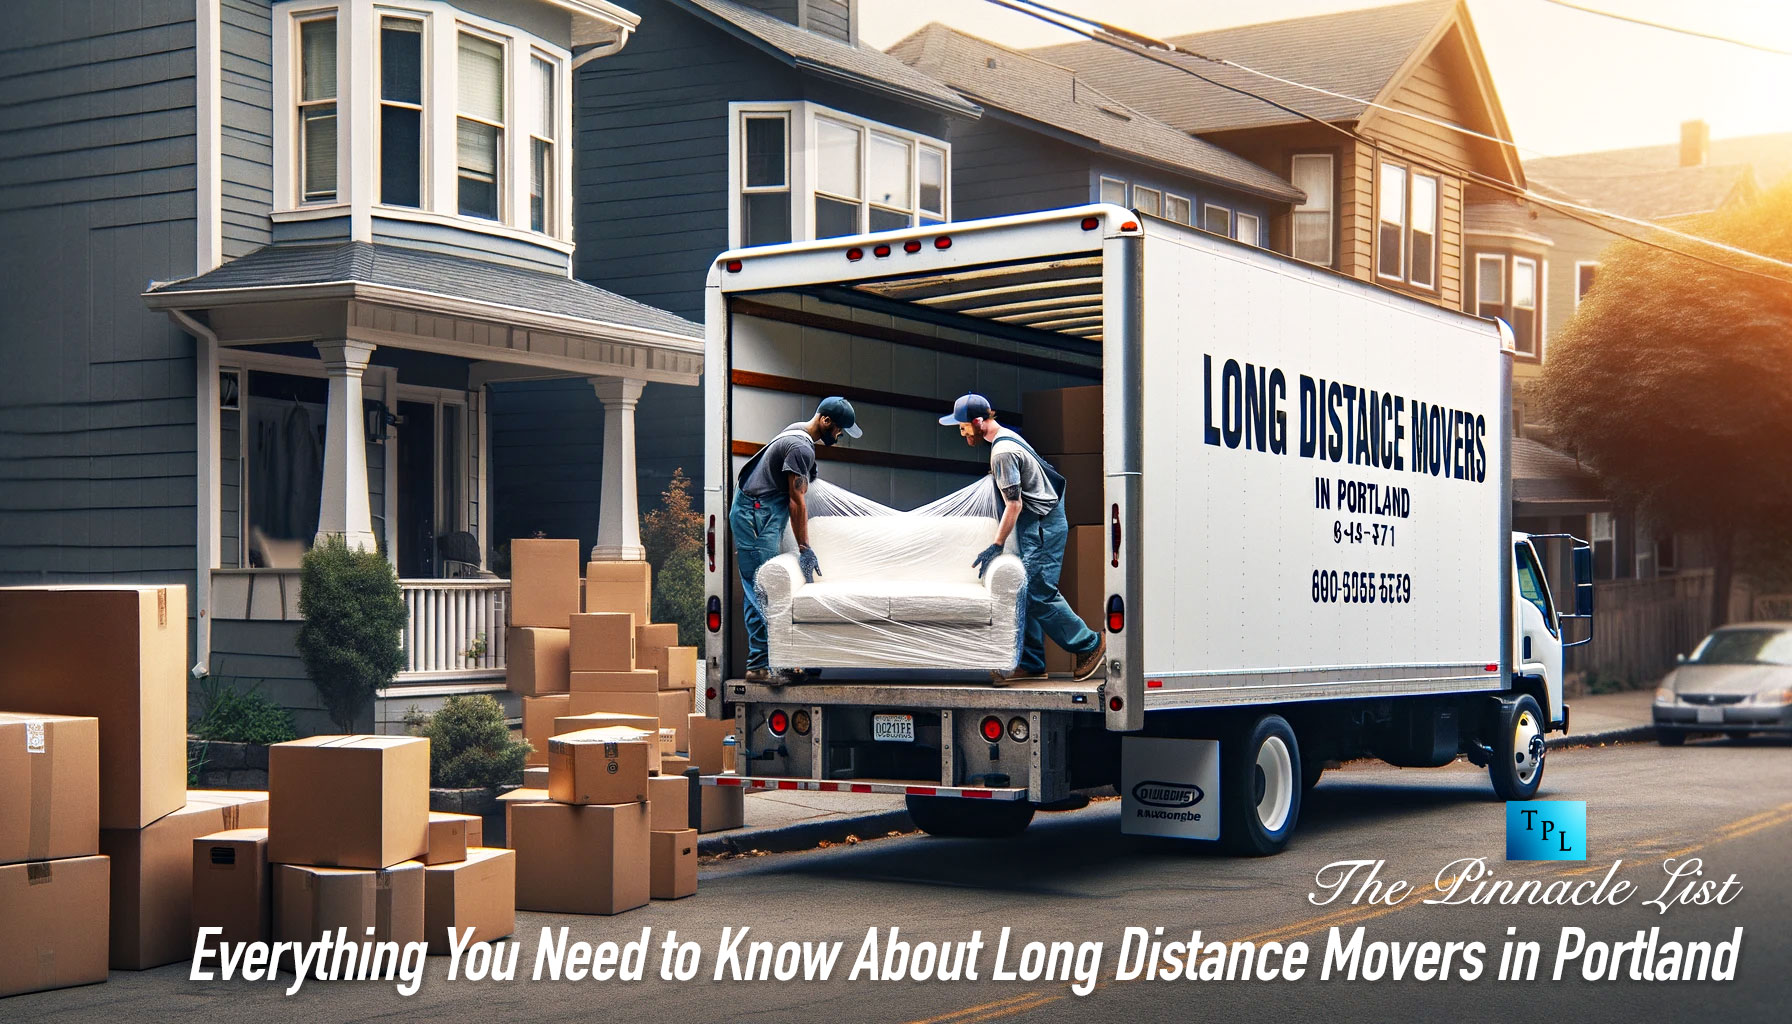 Everything You Need to Know About Long Distance Movers in Portland